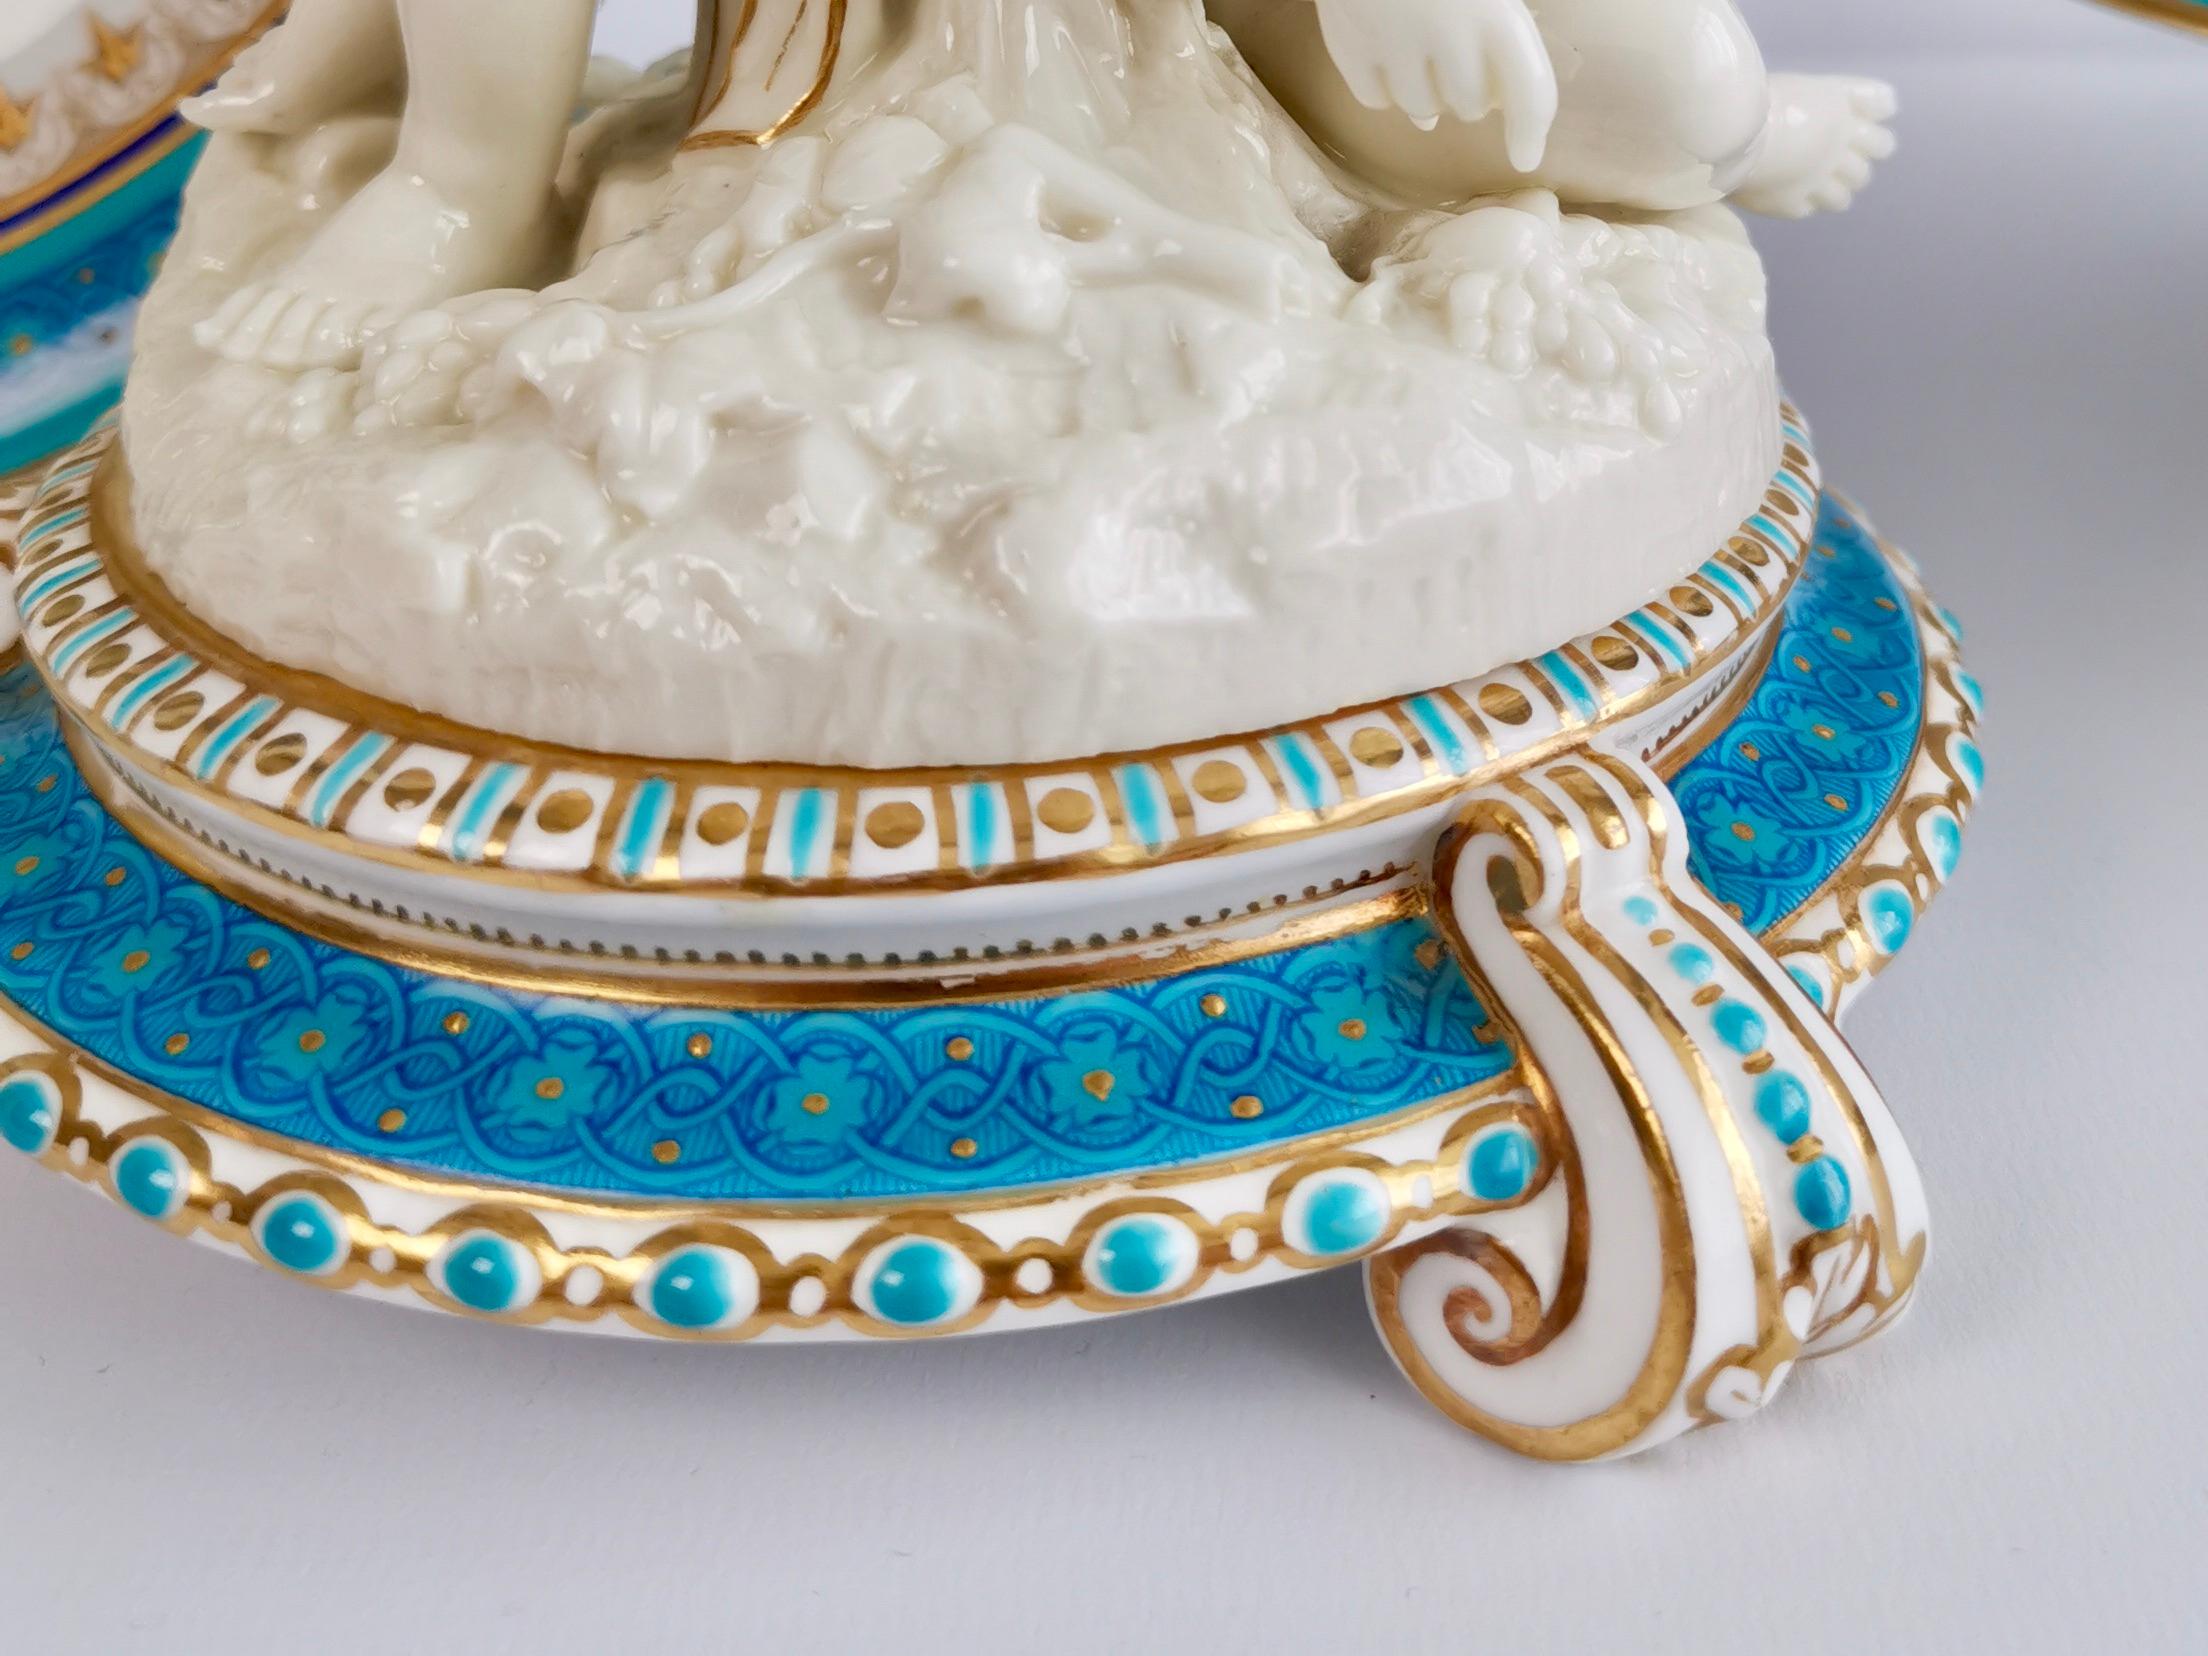 Early 20th Century Royal Worcester Porcelain Dessert Service, Turquoise with Parian Cherubs, 1910